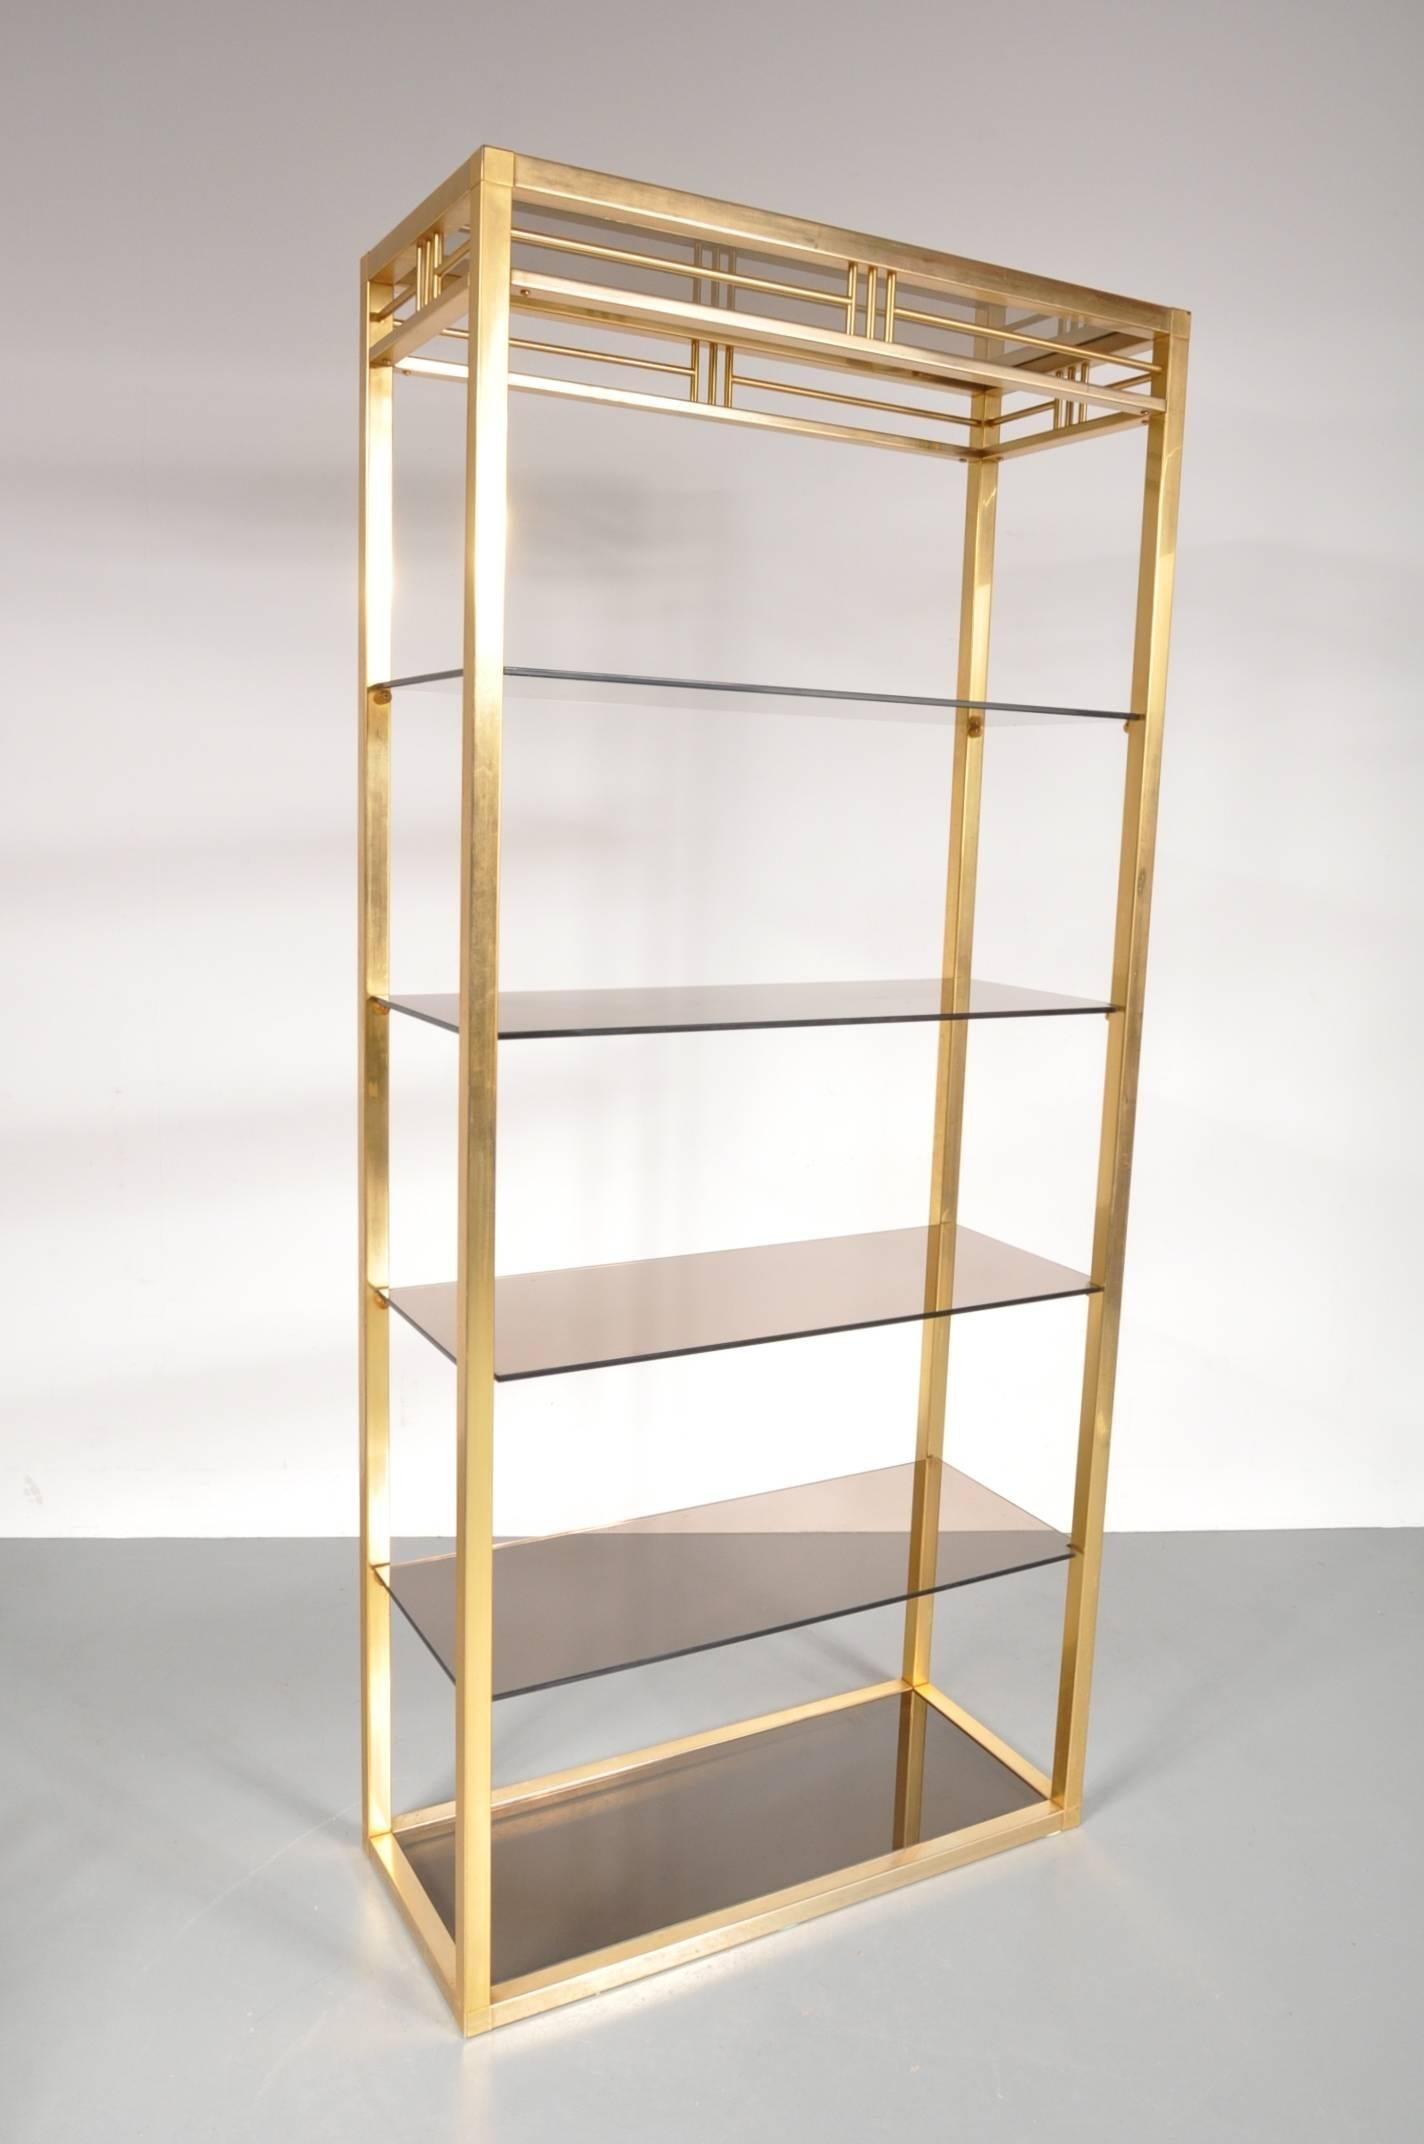 A beautiful, very appealing cabinet produced in Belgium around 1970.

This eye-catching piece is made of high quality brass in a beautiful golden colour, together with the smoke glass creating a wonderful luxurious style! The straight shapes and